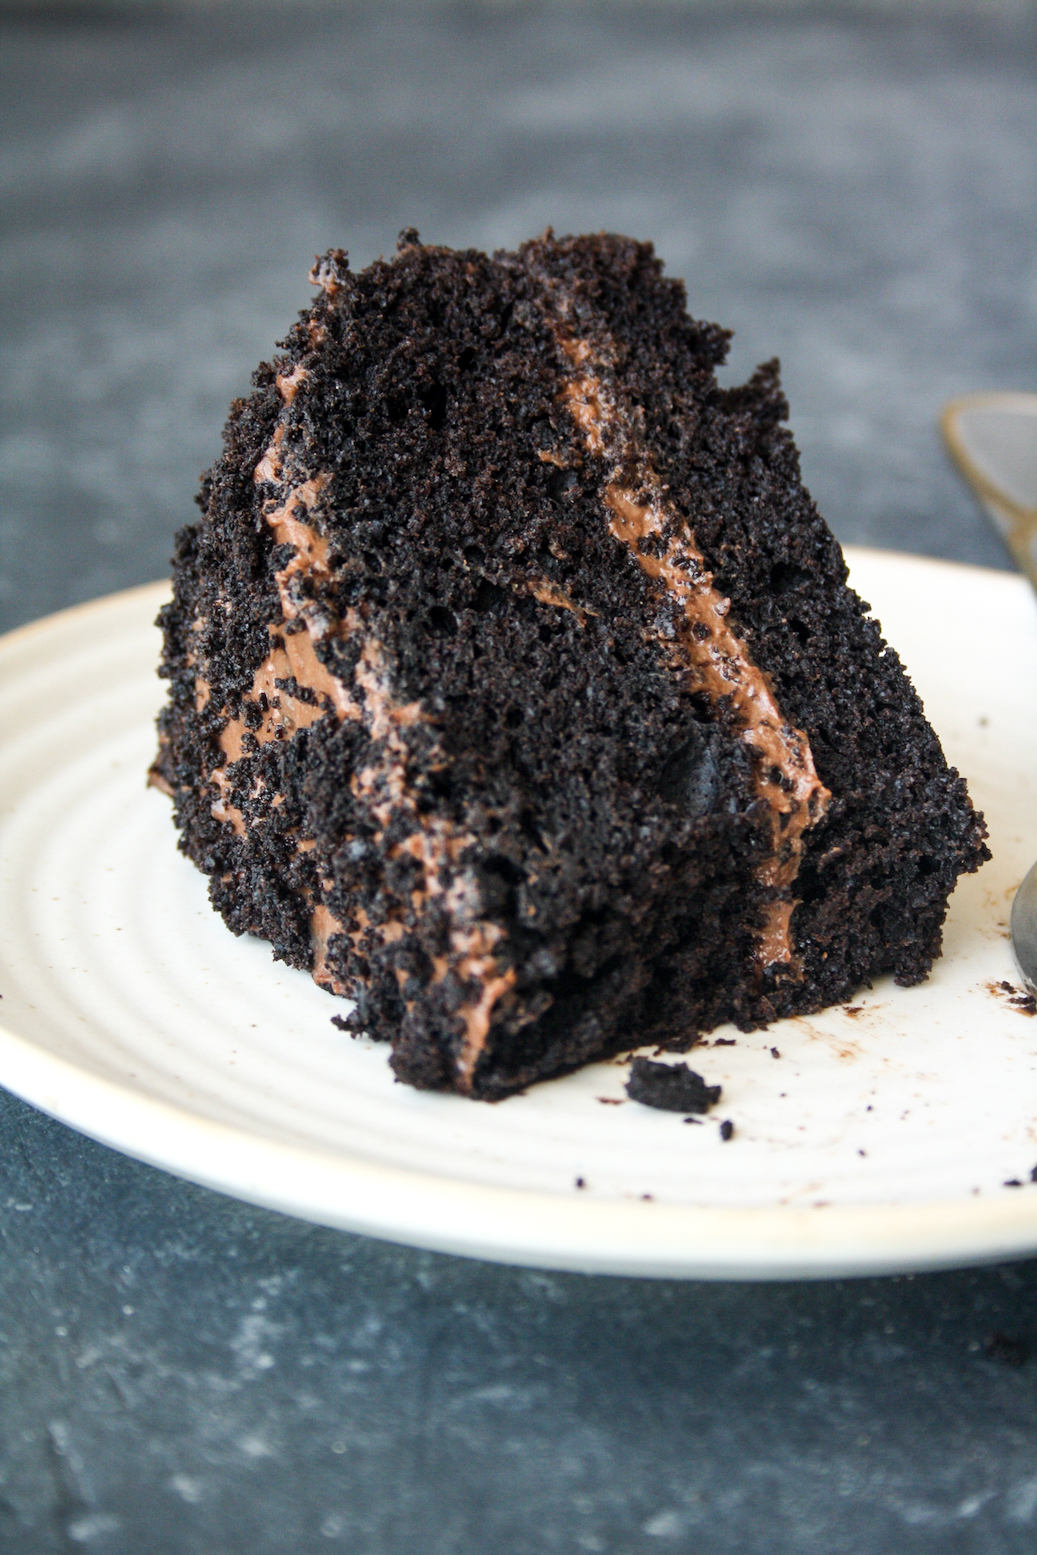 Rich, moist chocolate cake filled with chocolate pudding and covered in cake crumbs!